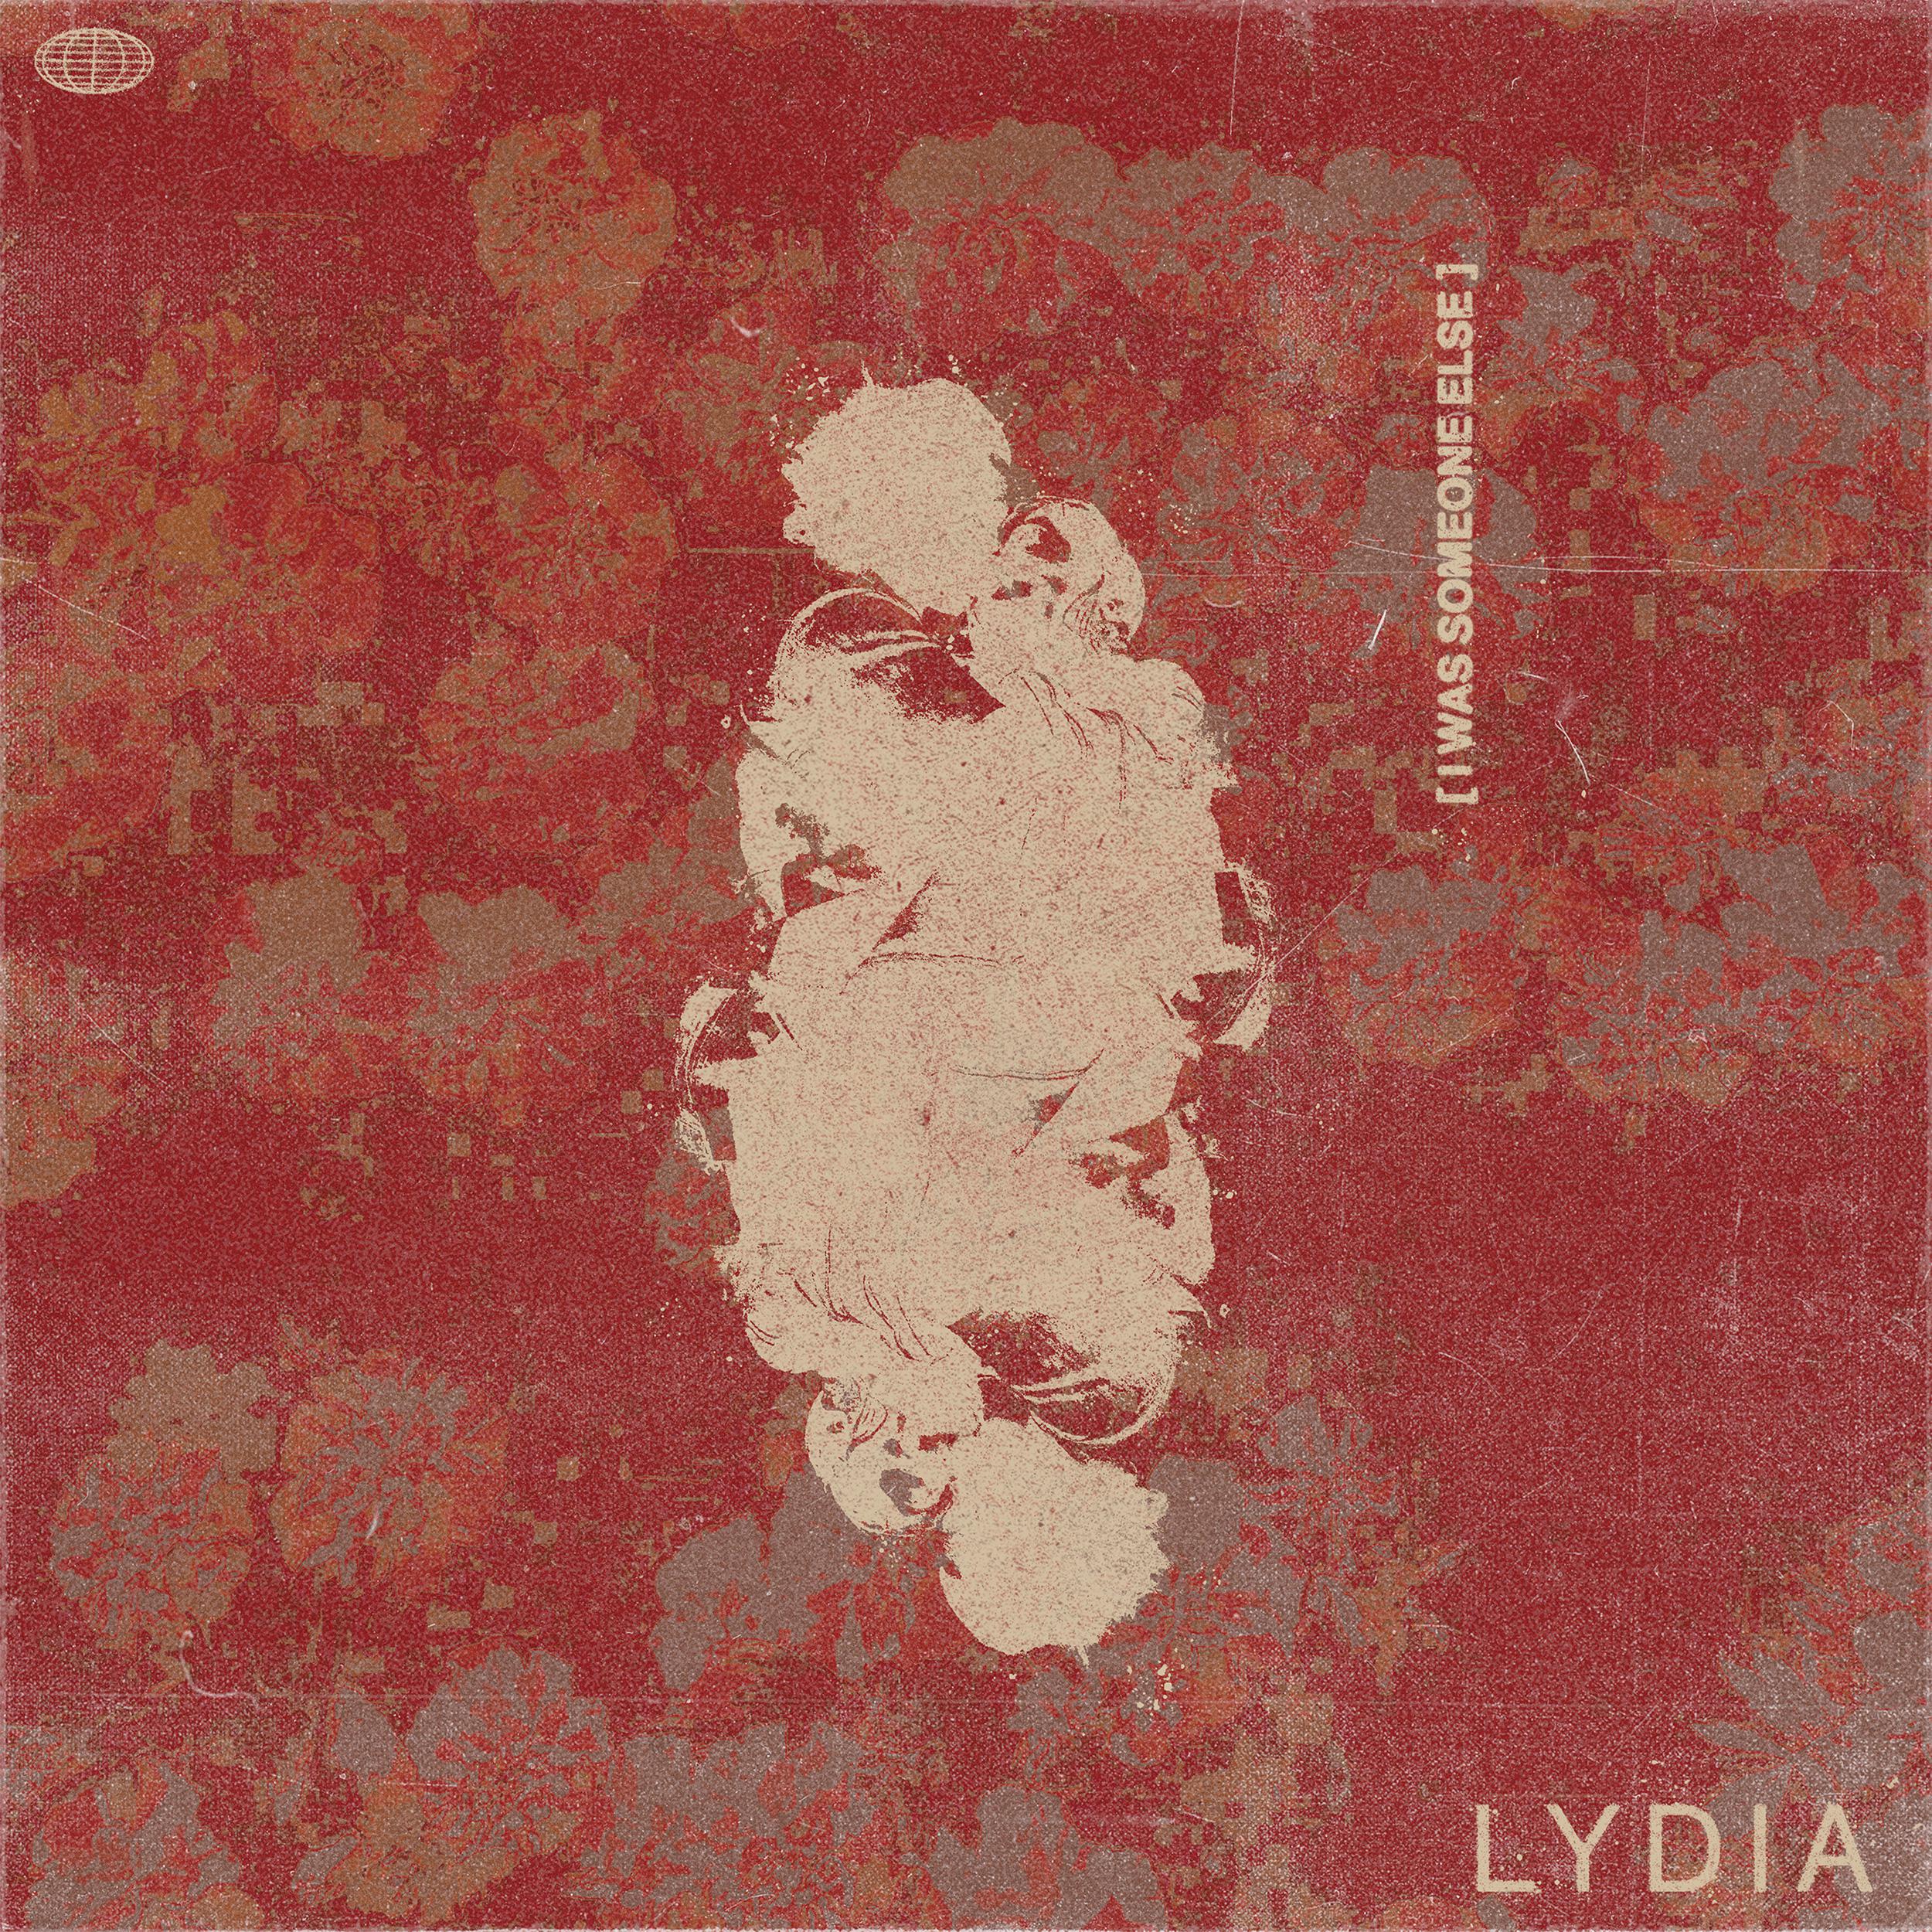 Lydia - Who We Gonna Be Now